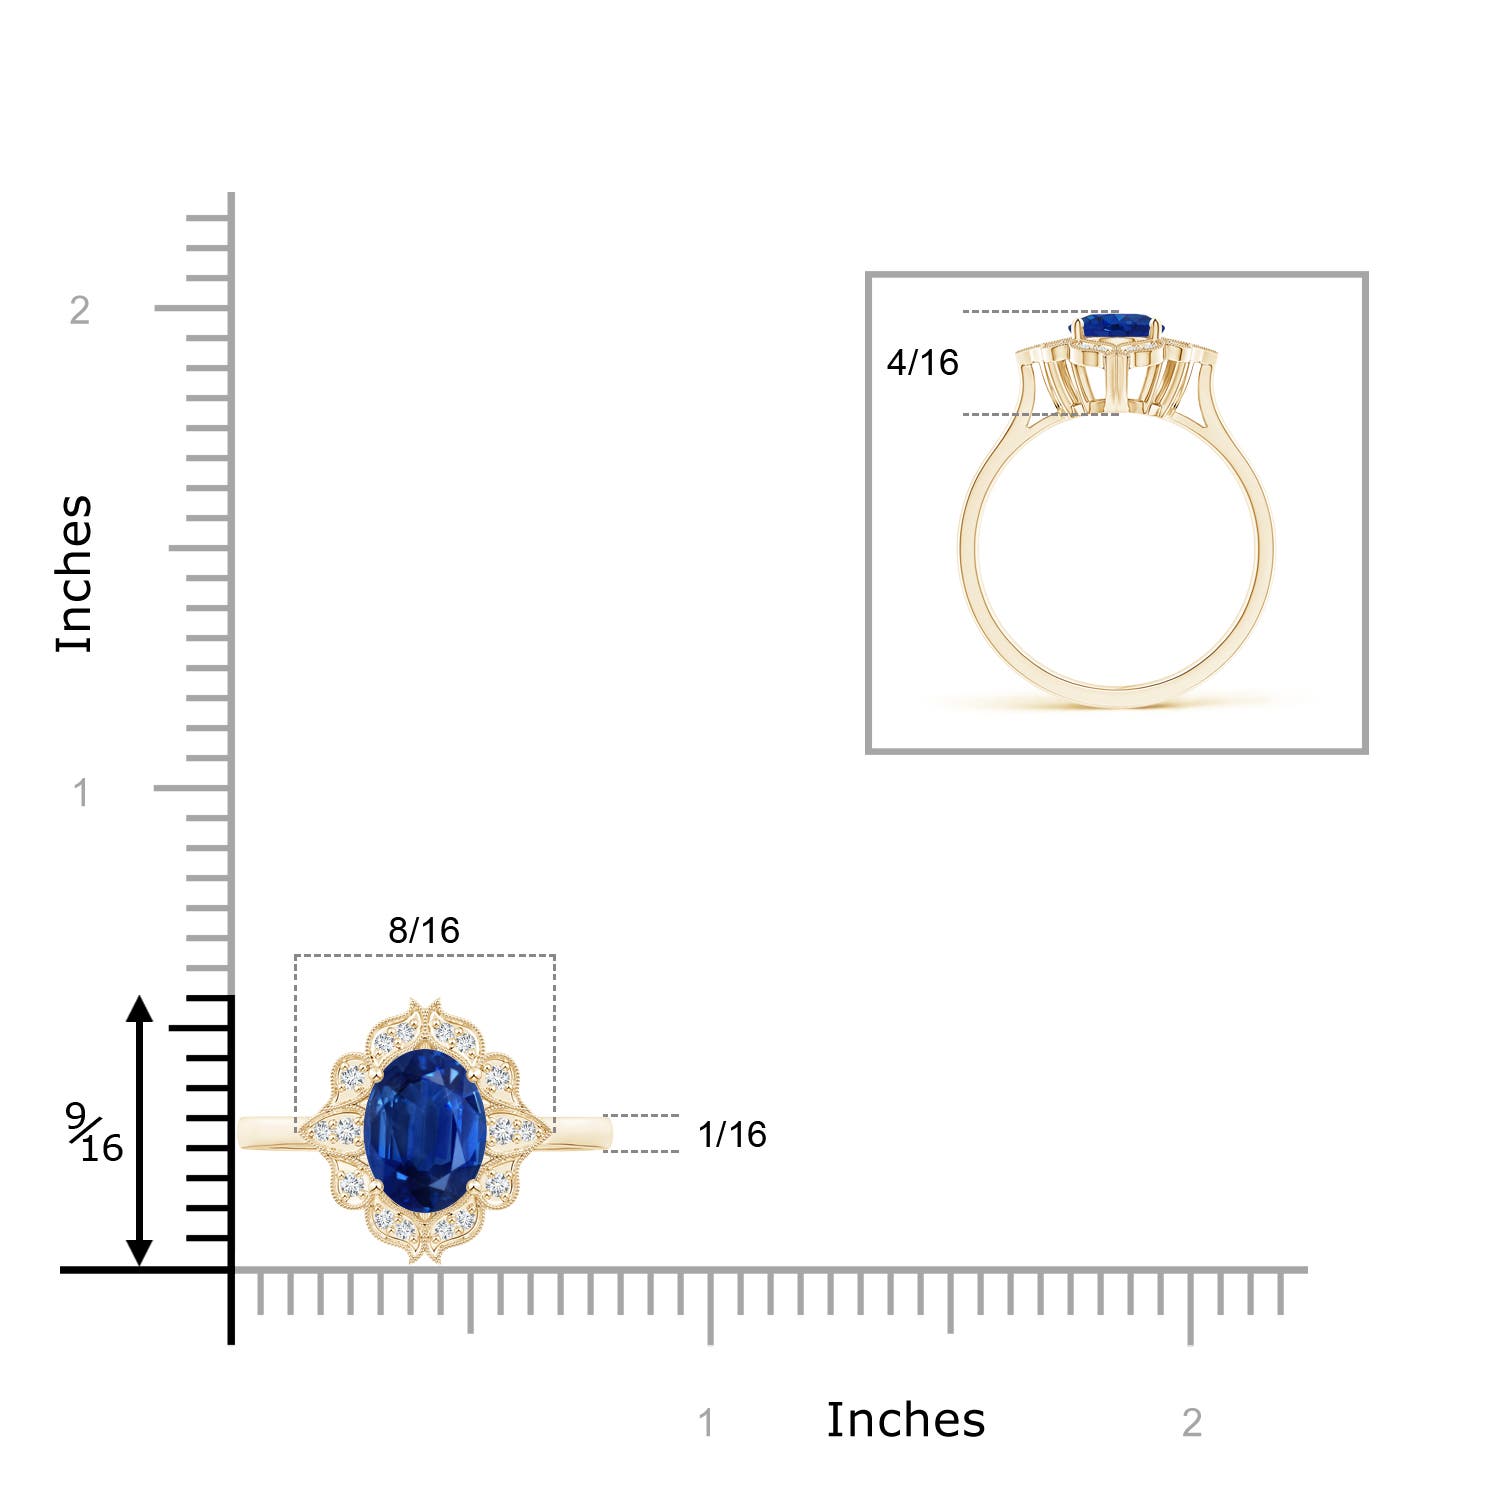 AAA - Blue Sapphire / 1.65 CT / 14 KT Yellow Gold